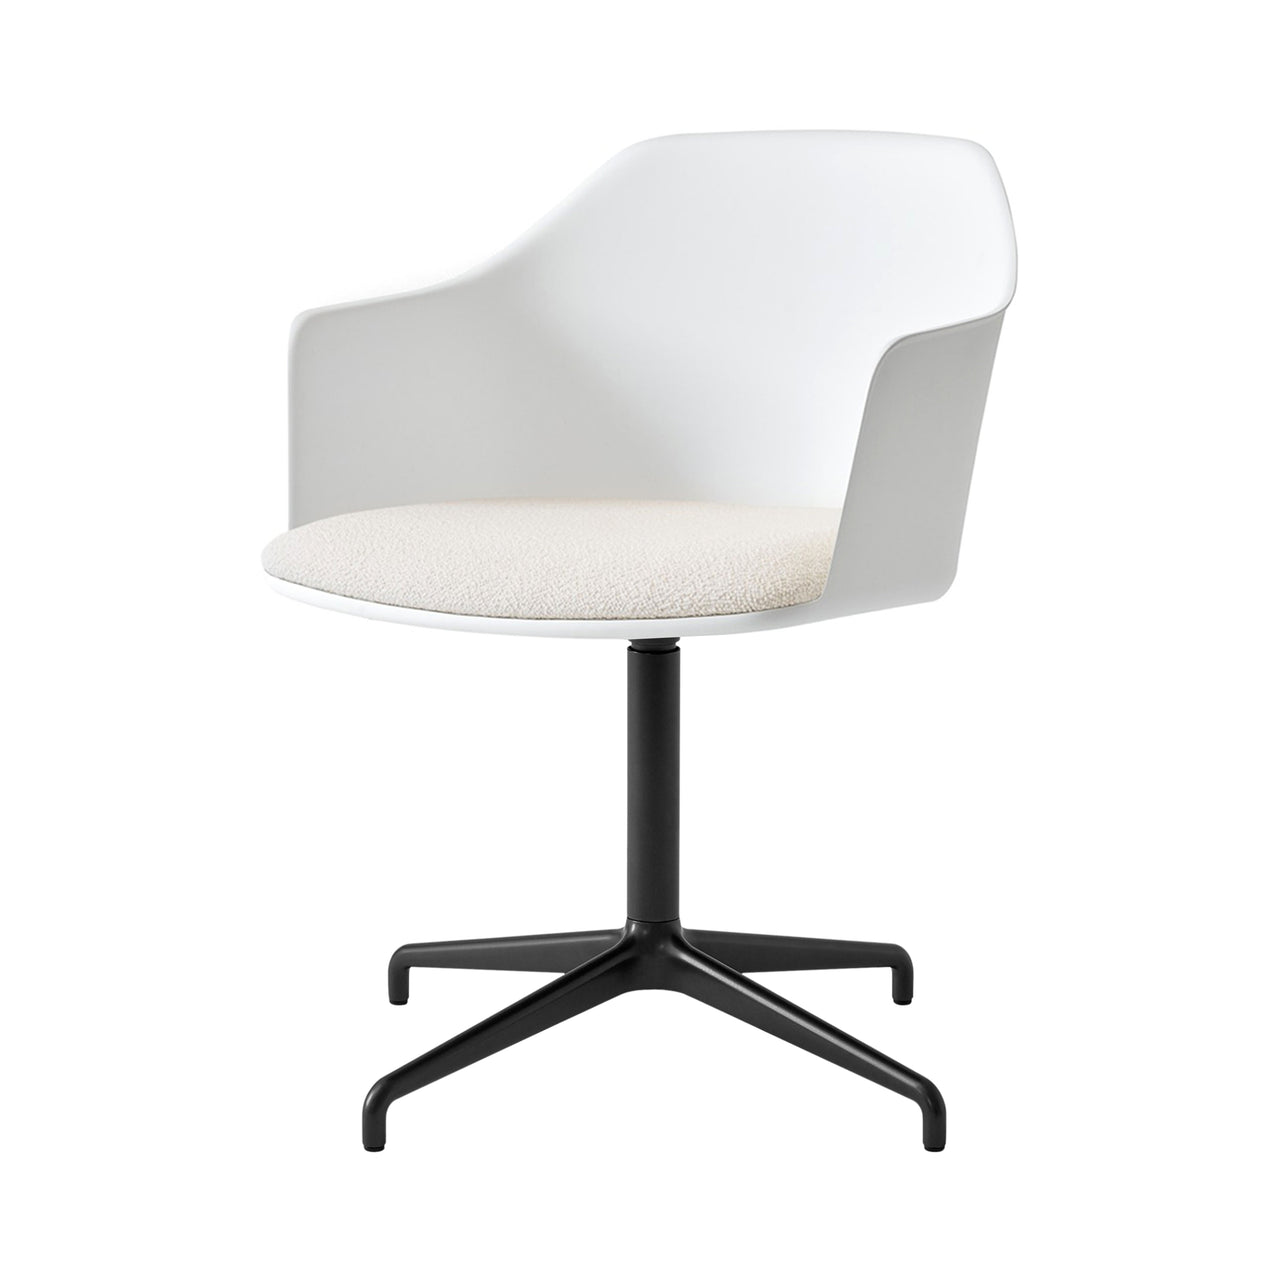 Rely Chair HW39: White + Black